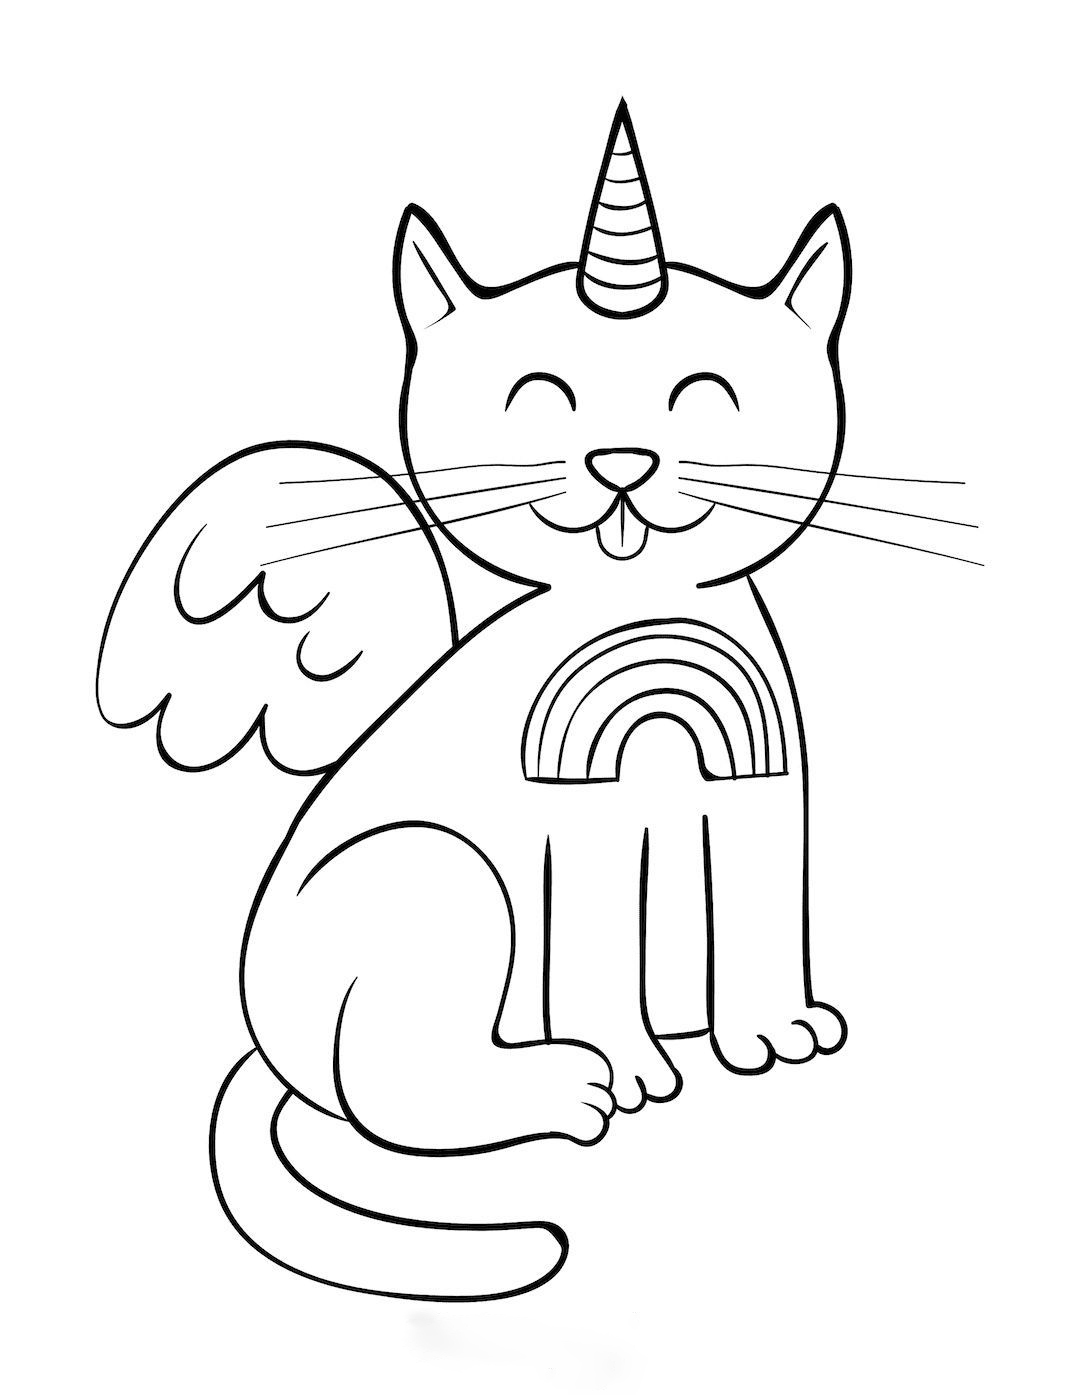 Unicorn Cat with wings from Unicorn Cat